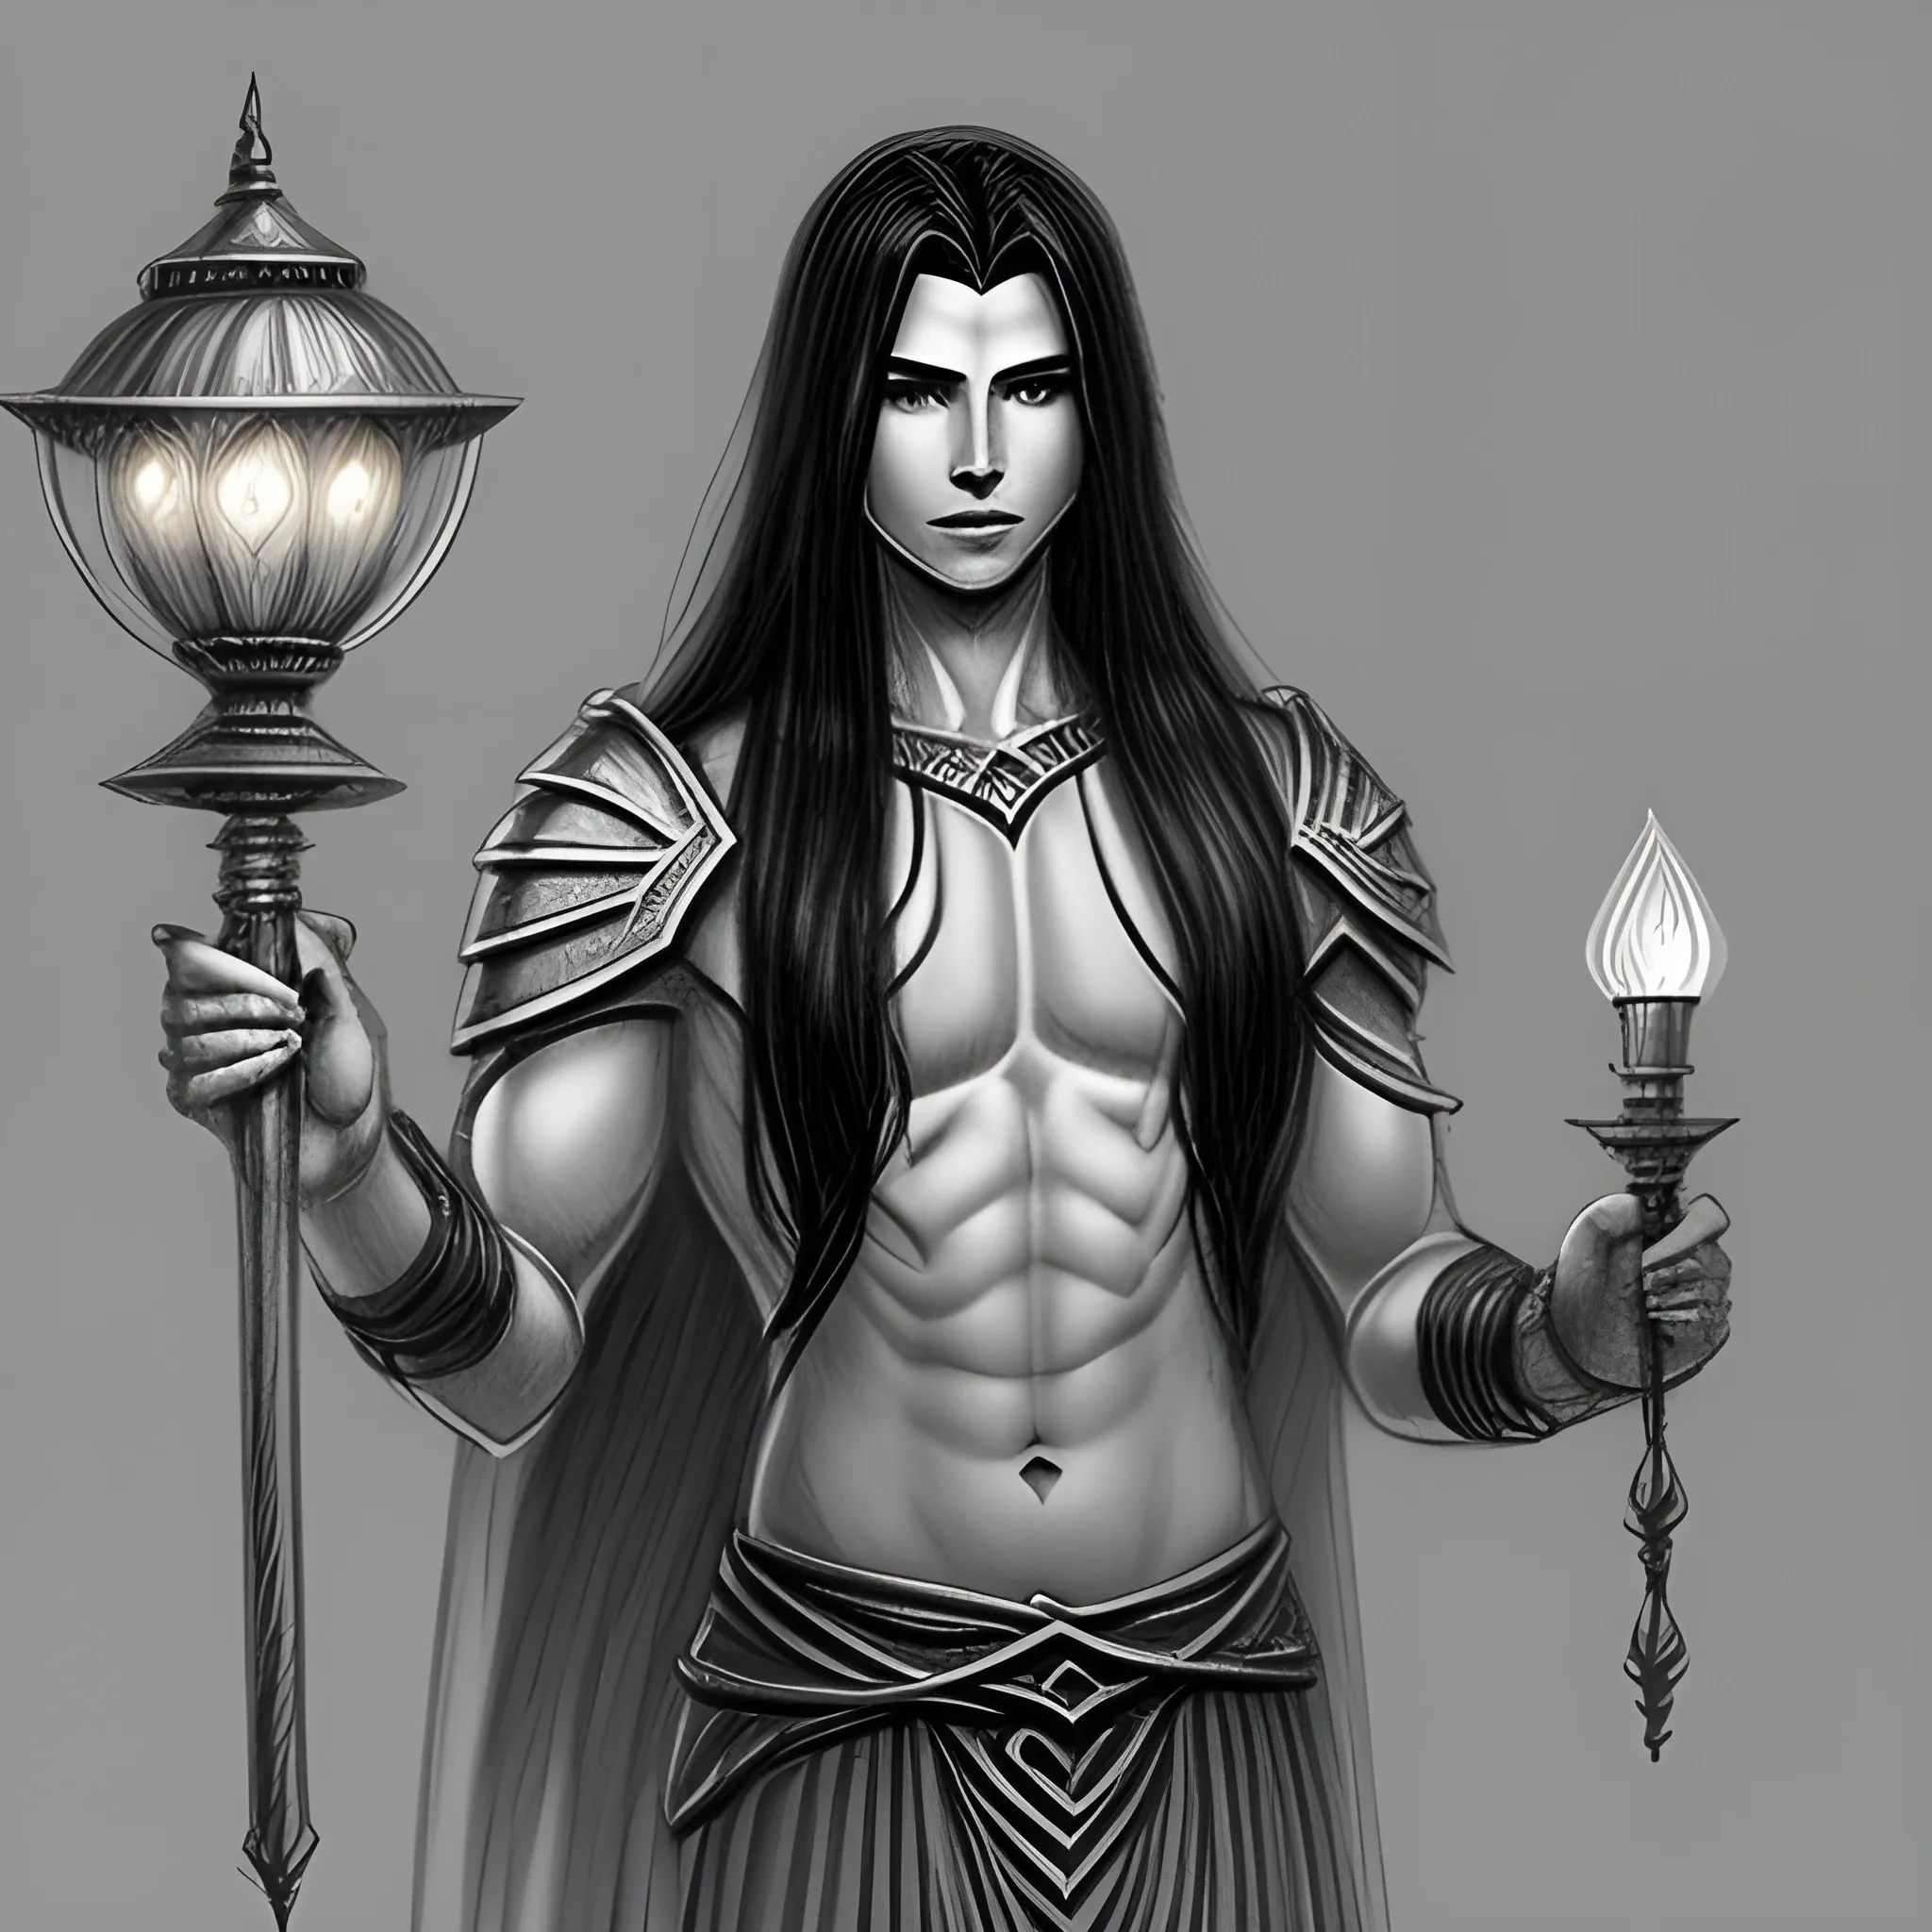 long black haired, male, aasimar, no armor, holding a djinni lamp
, Pencil Sketch